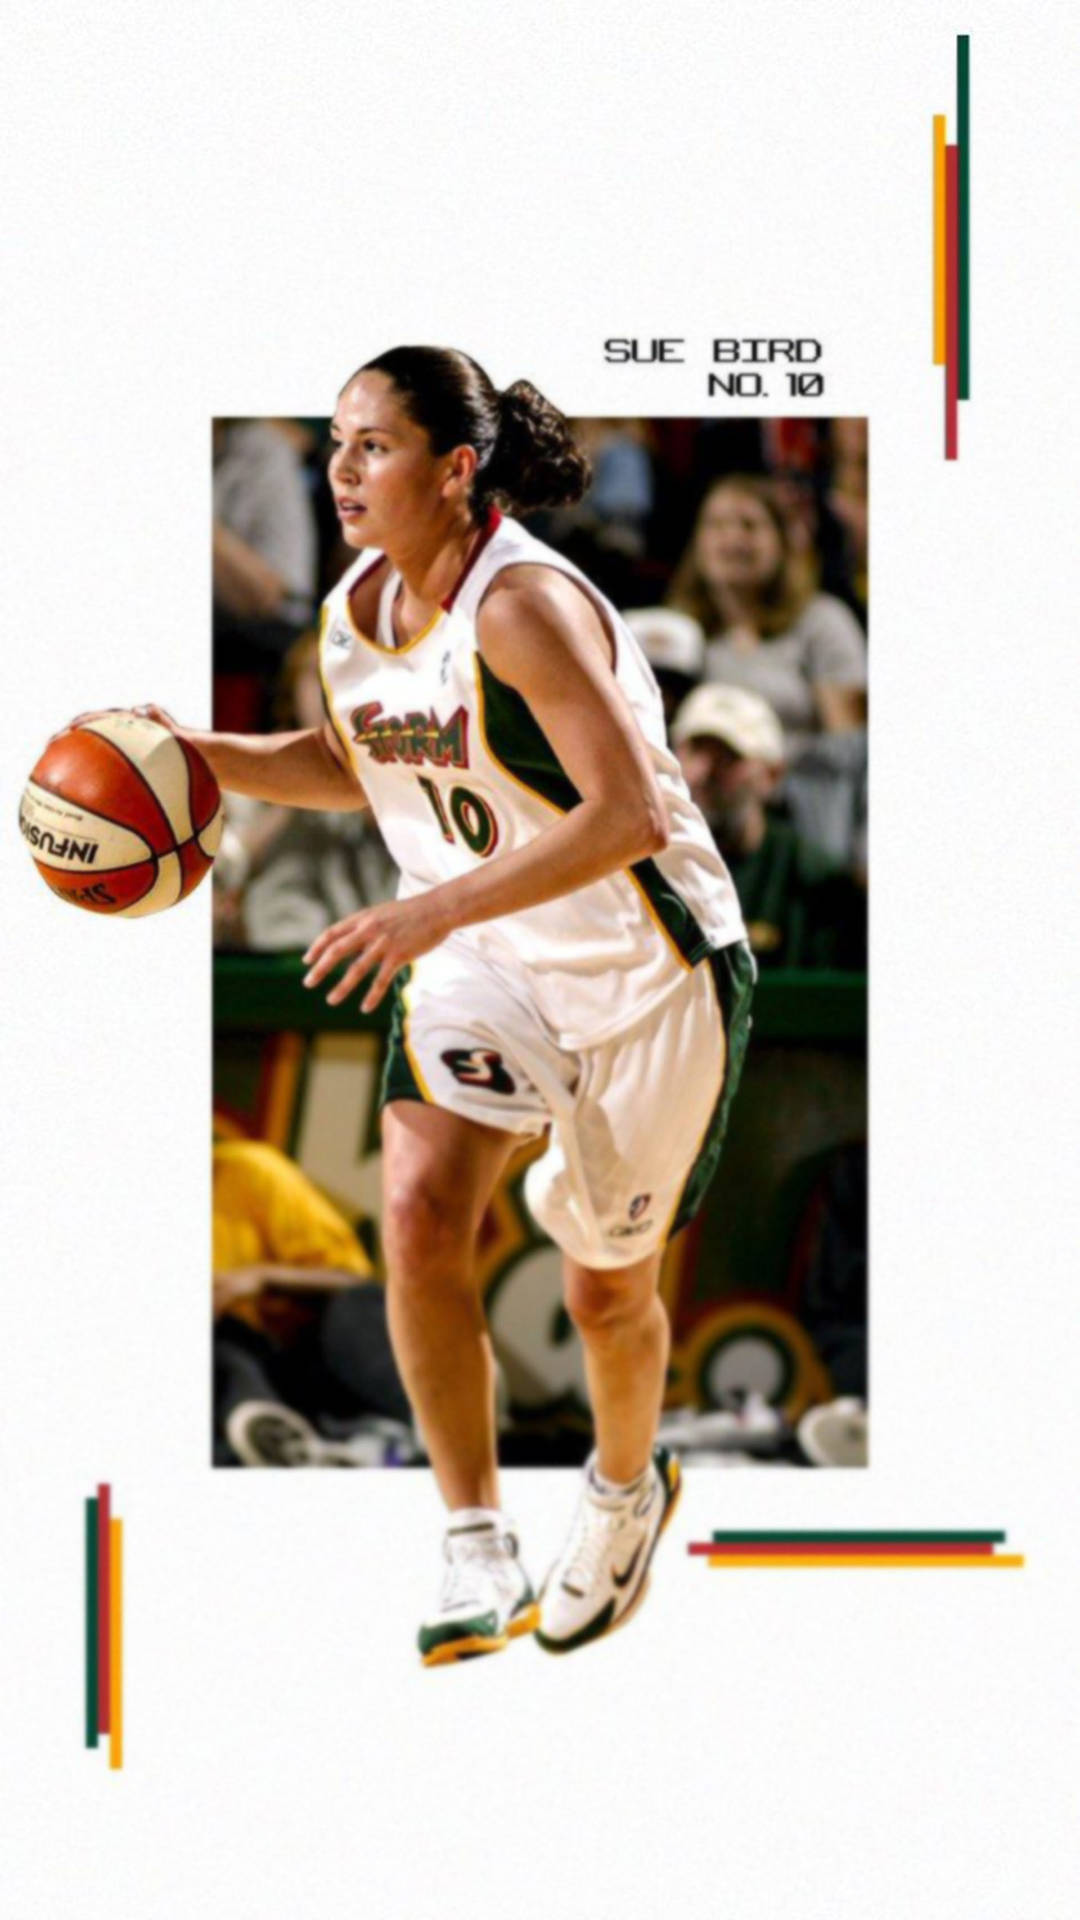 Caption: Sue Bird In Action On The Basketball Court